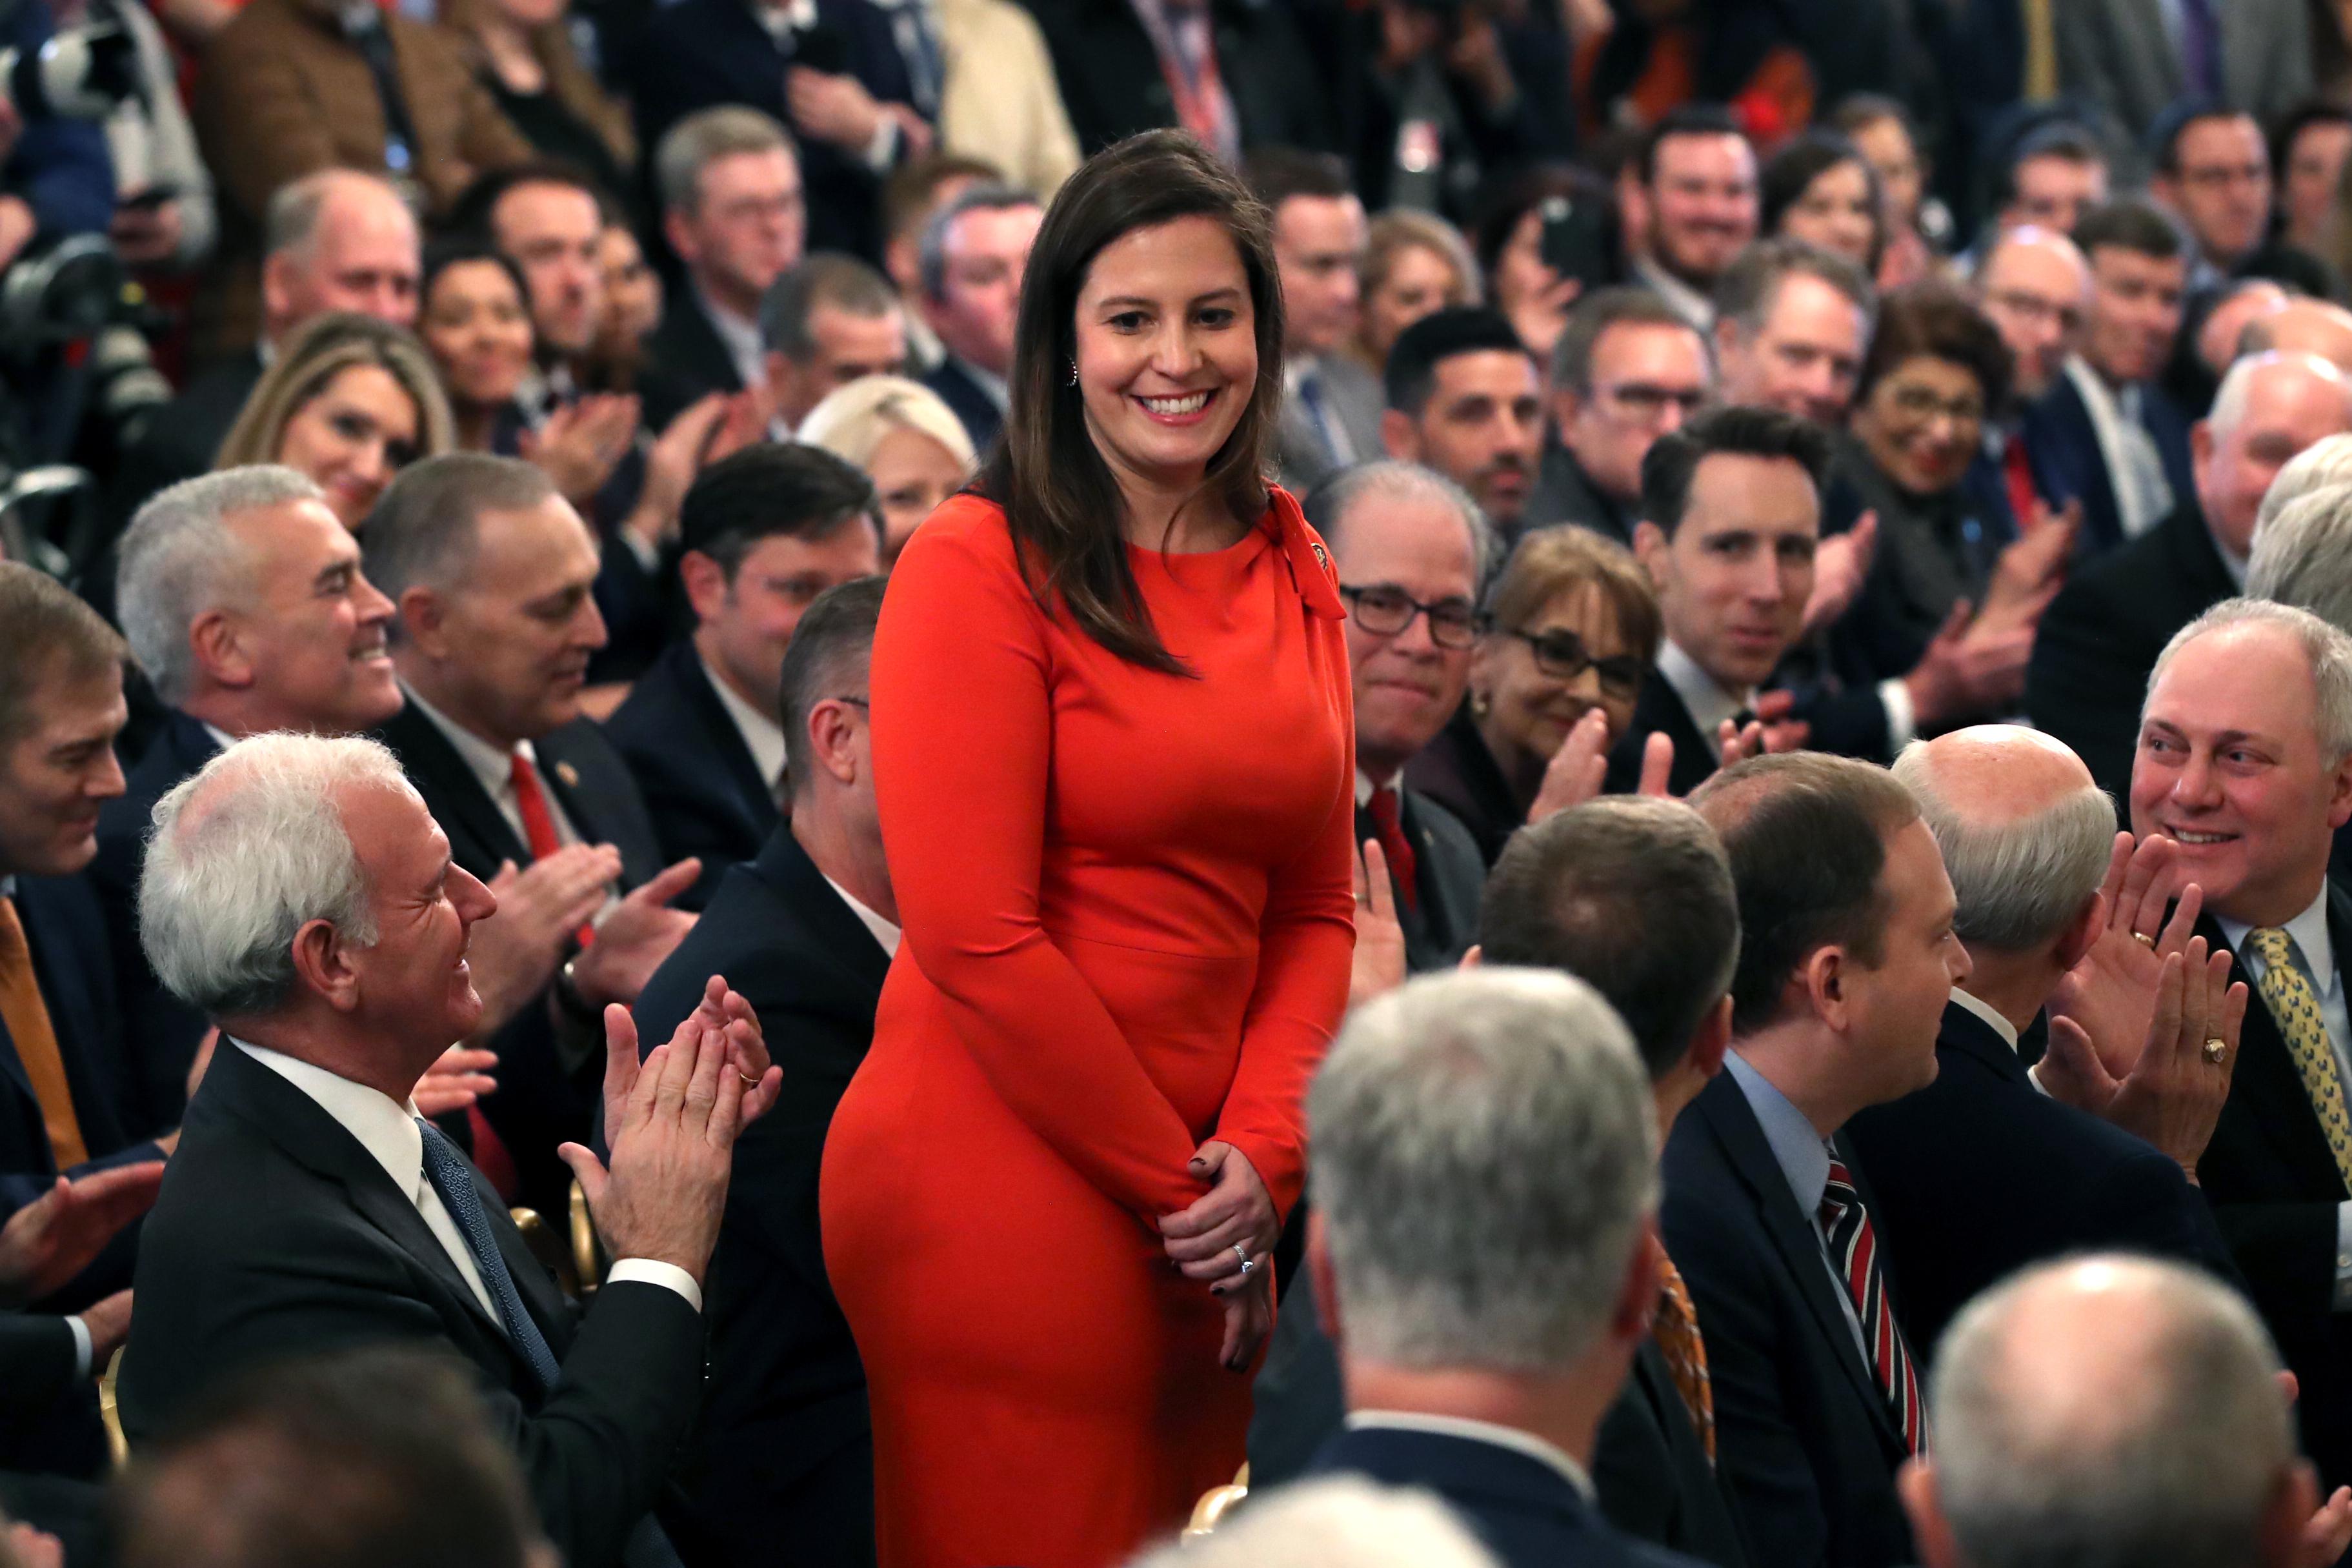 Stefanik stands and smiles as people seated close together around her applaud, some smiling at her